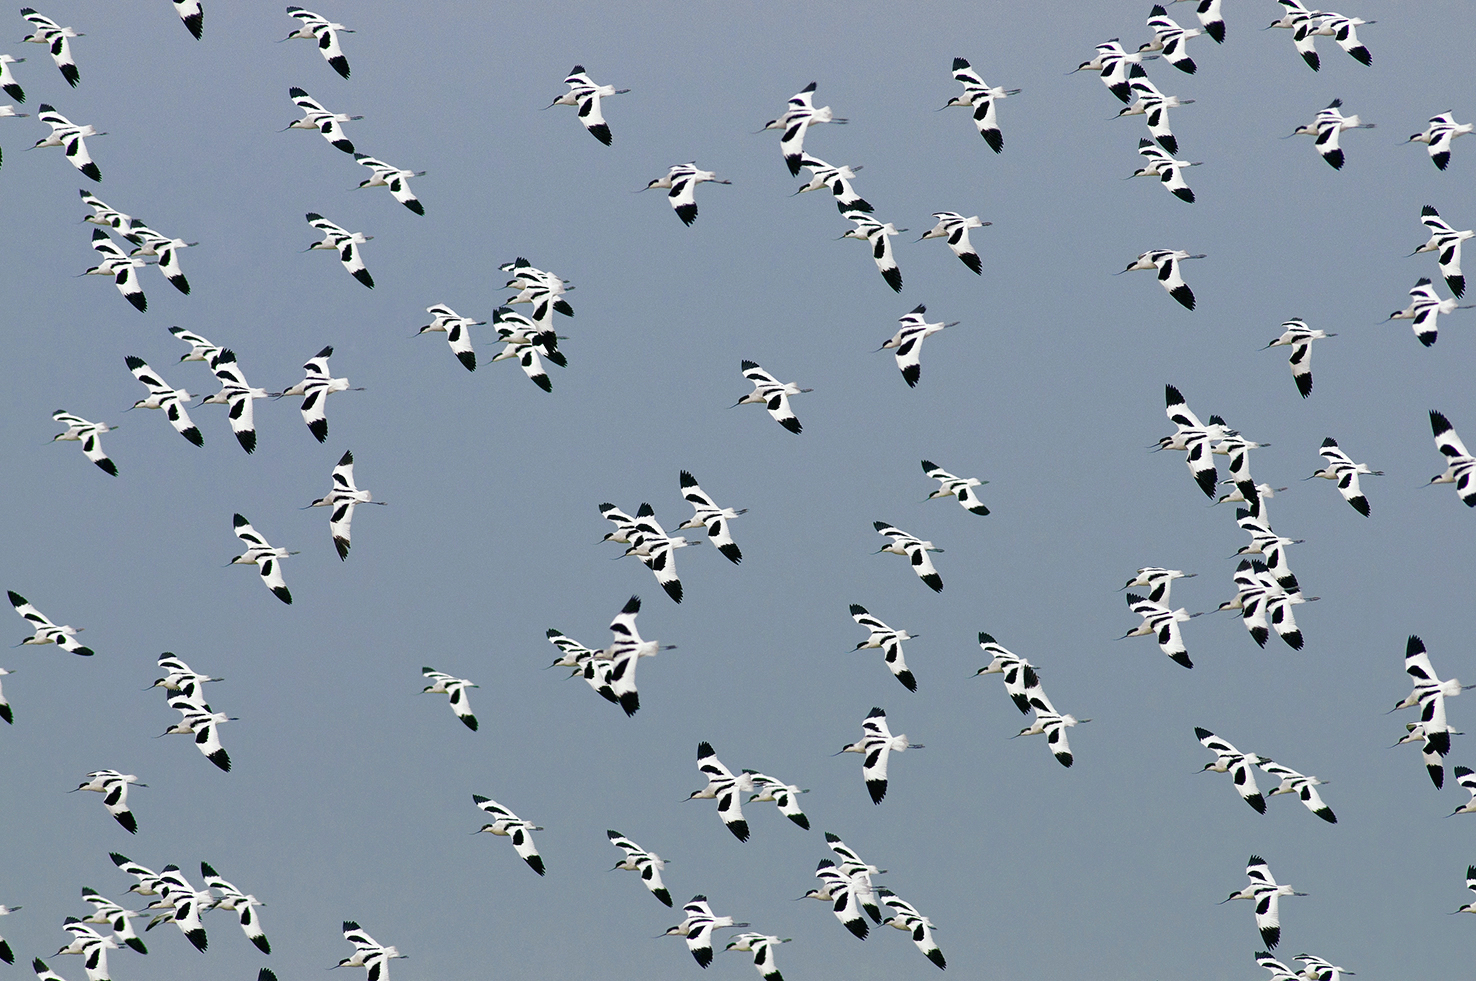 Bird Migration features in our European tours